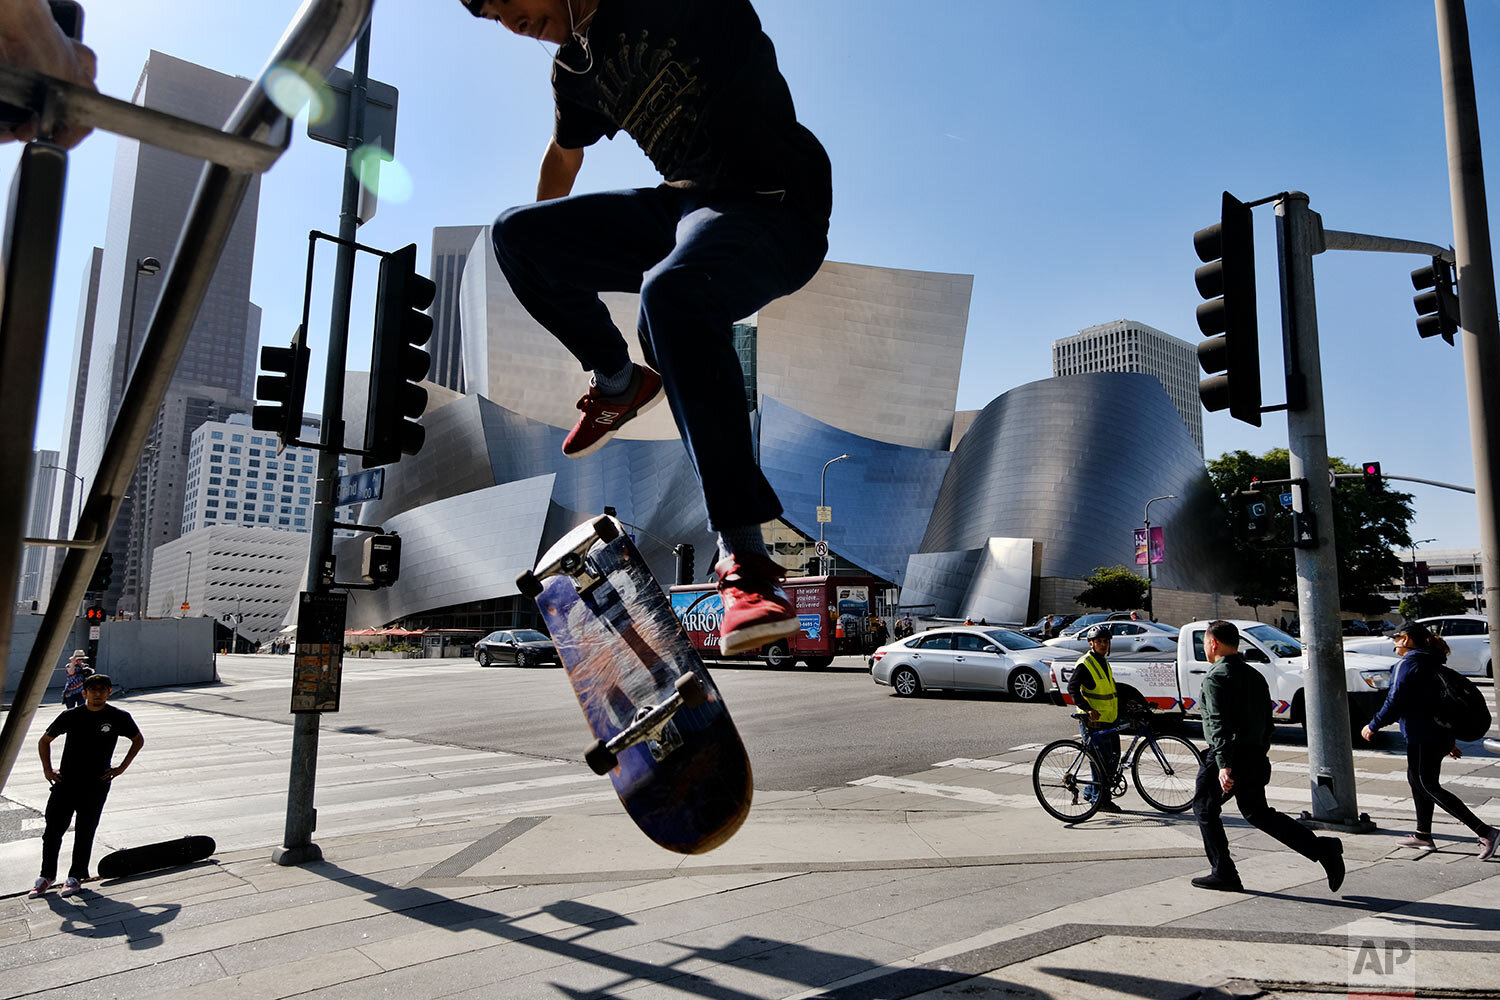  A skateboarder attempts to jump a small staircase across the street from the Walt Disney Concert Hall in downtown Los Angeles on Oct. 29, 2019. (AP Photo/Richard Vogel) 